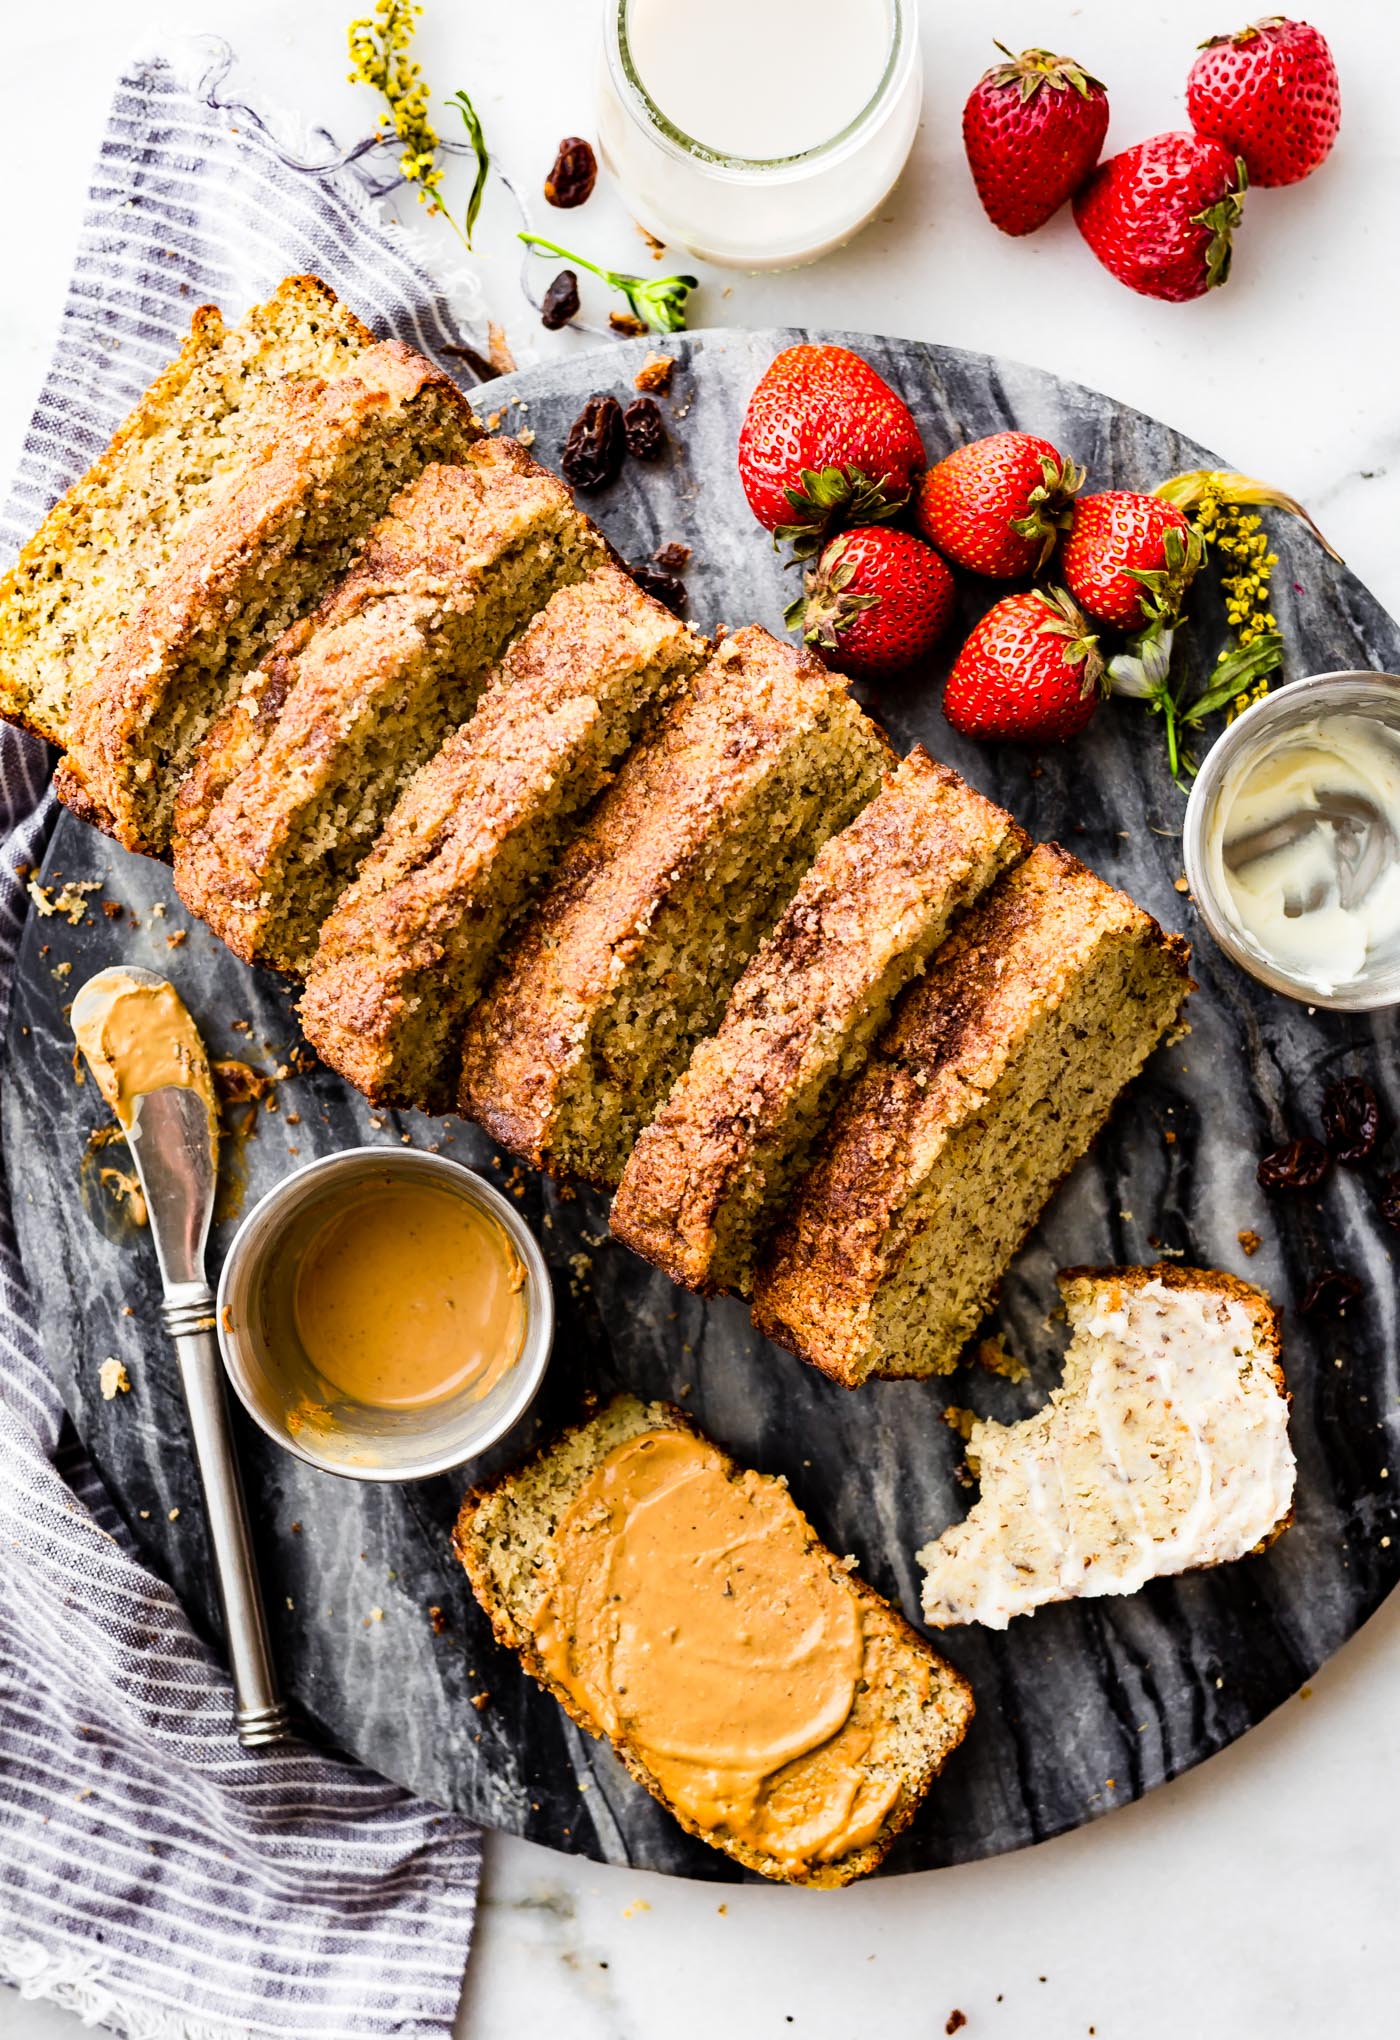 This simple and delicious cinnamon almond flour bread is a versatile paleo bread recipe you're whole family will love! Made with few ingredients; almond flour, flax seed, cinnamon, and eggs to name a few. A nourishing wholesome bread for breakfast or snacking.